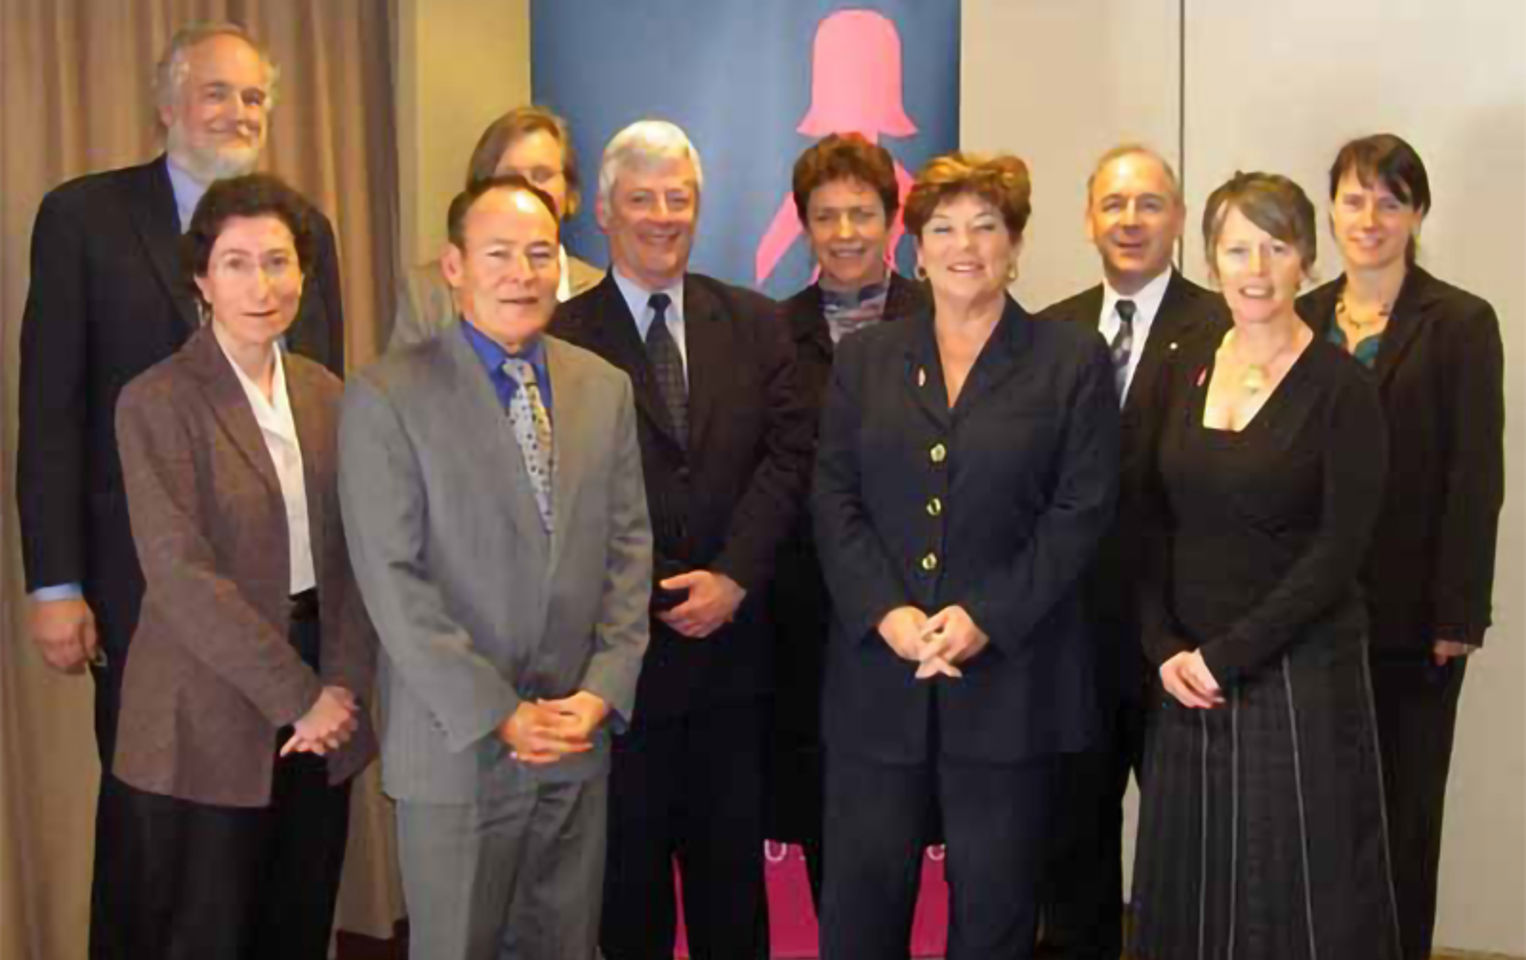 Photo of participants in BCNA's first roundtable in 2006